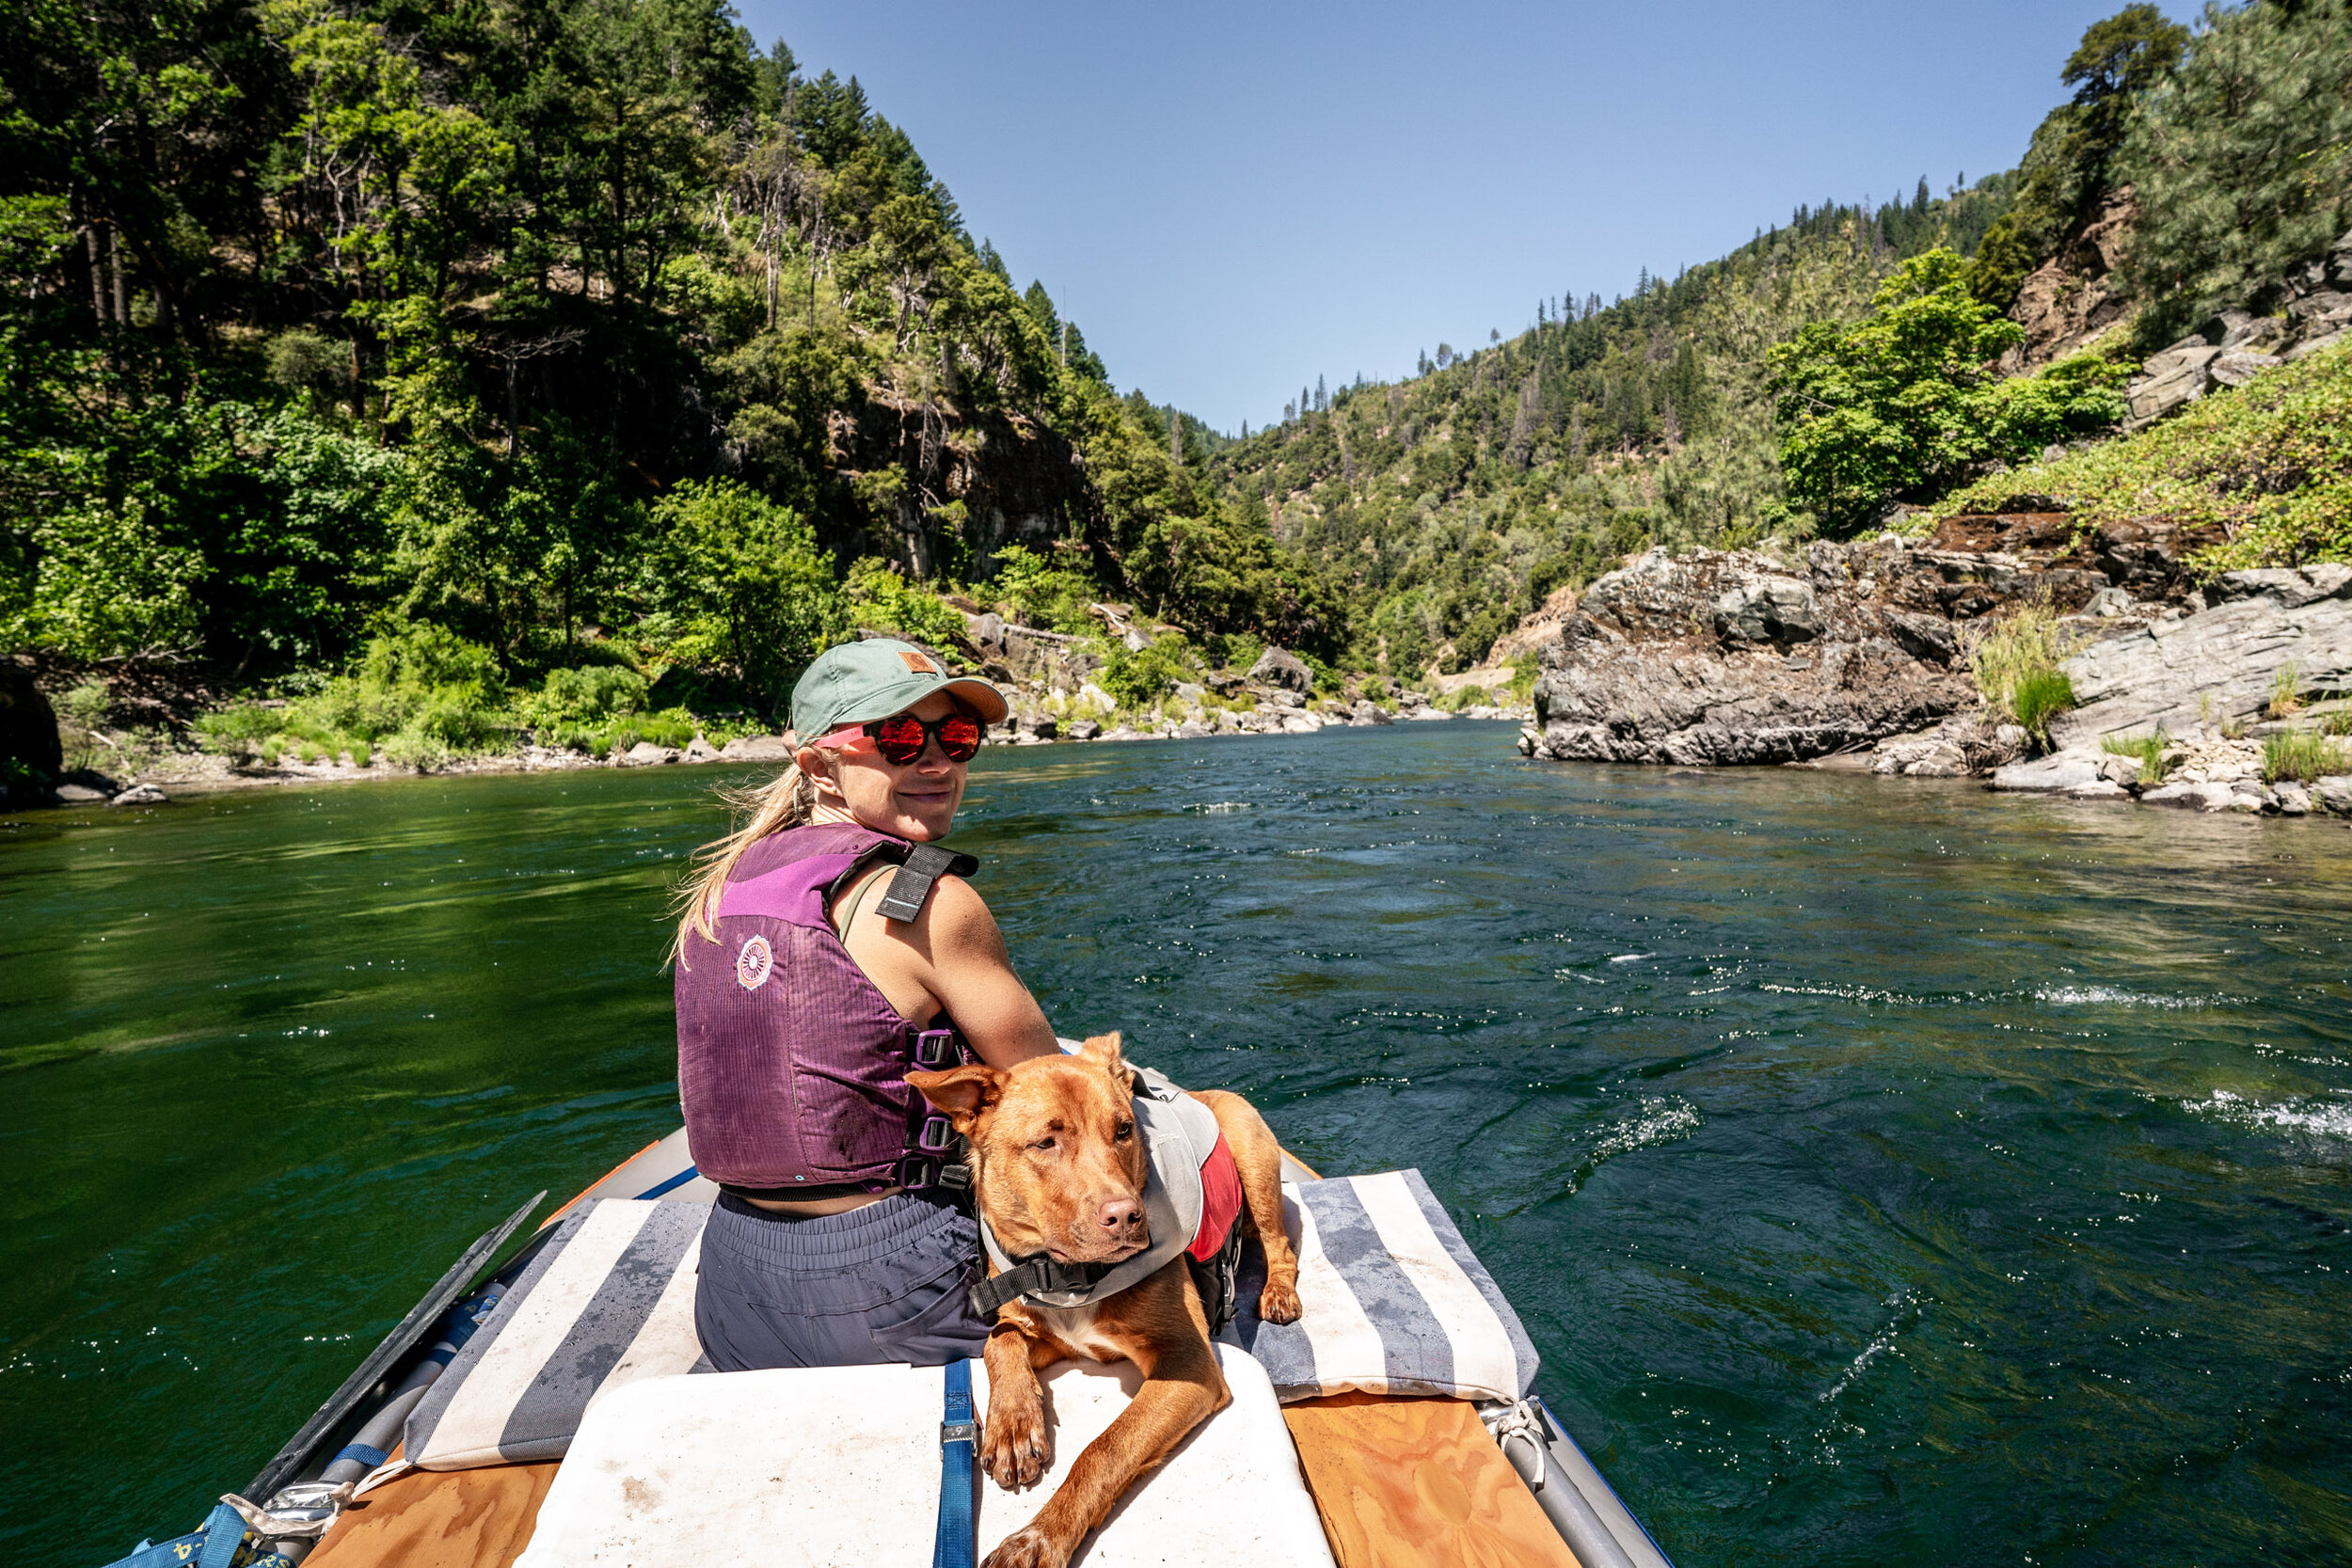 A woman and a dog sit on a raft, wearing lifejackets on a river